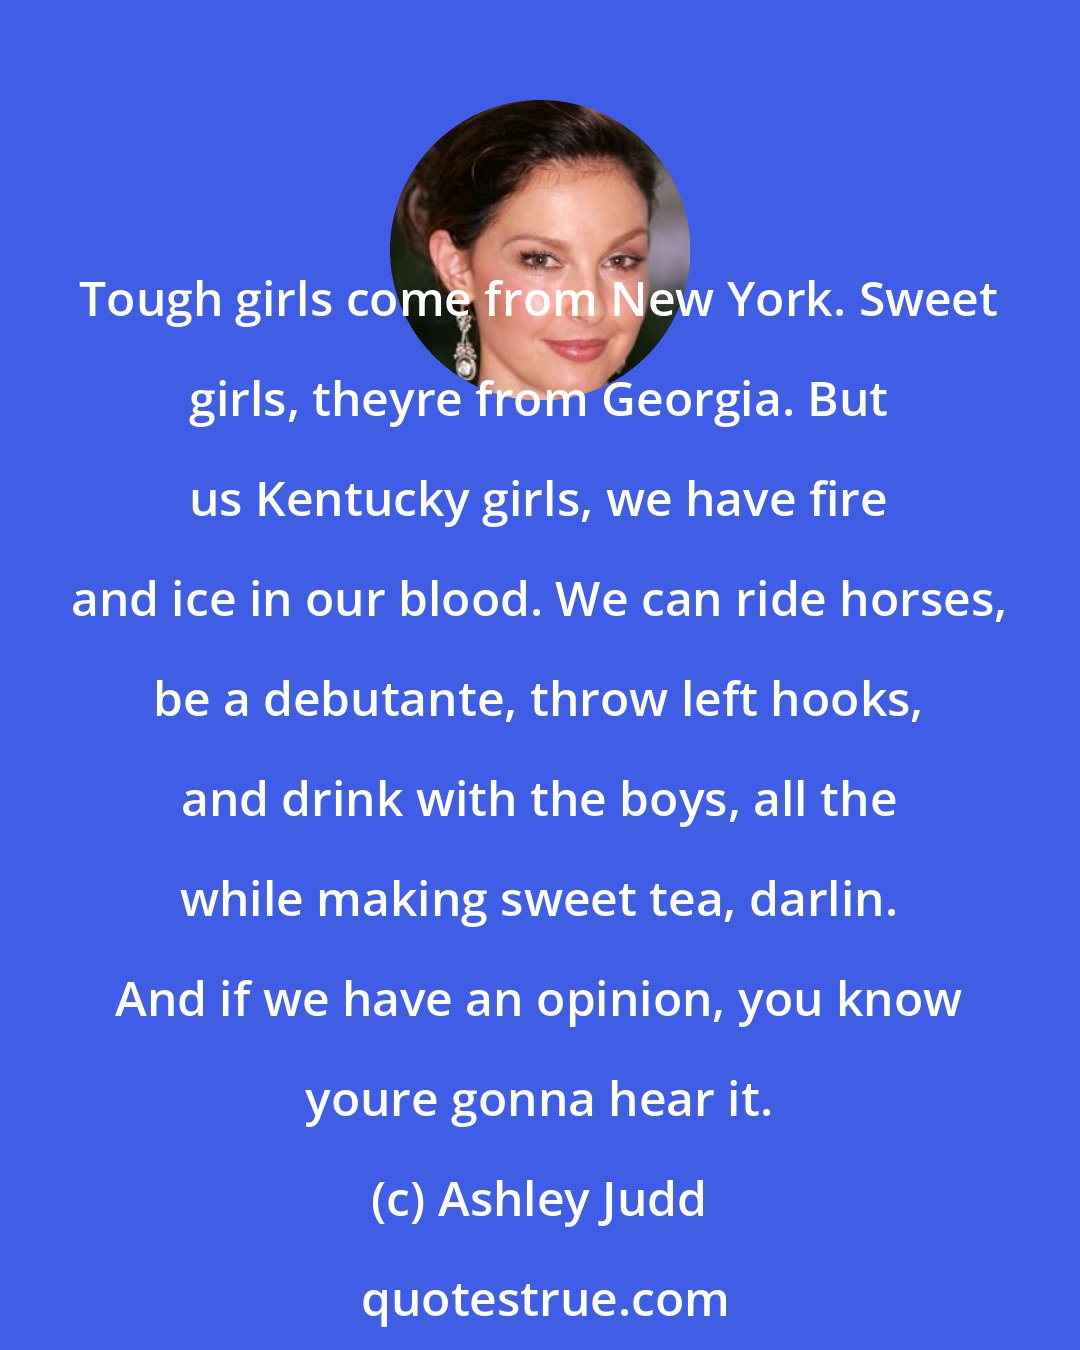 Ashley Judd: Tough girls come from New York. Sweet girls, theyre from Georgia. But us Kentucky girls, we have fire and ice in our blood. We can ride horses, be a debutante, throw left hooks, and drink with the boys, all the while making sweet tea, darlin. And if we have an opinion, you know youre gonna hear it.